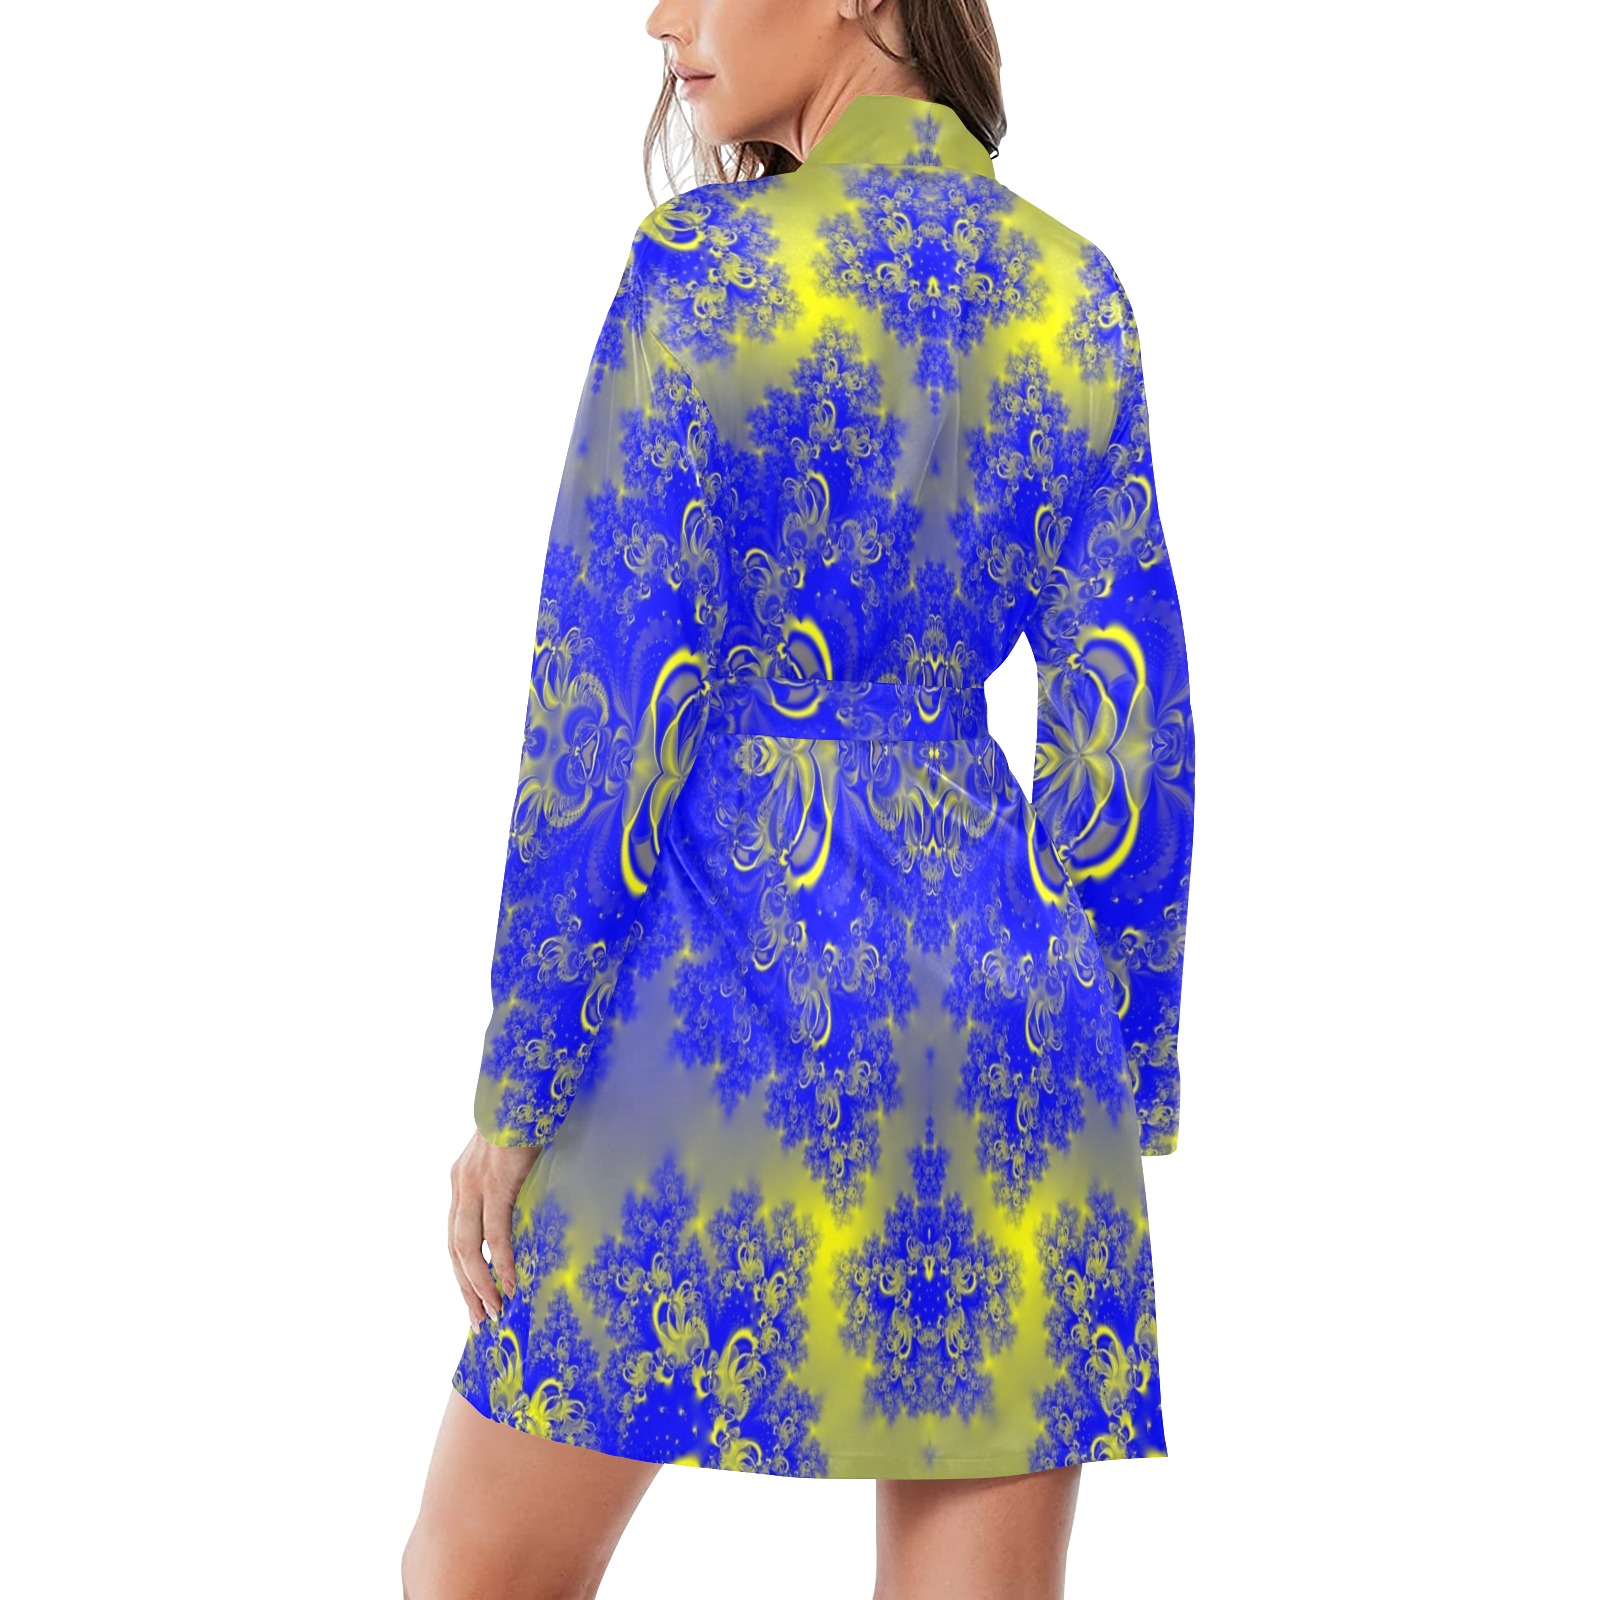 Sunlight and Blueberry Plants Frost Fractal Women's Long Sleeve Belted Night Robe